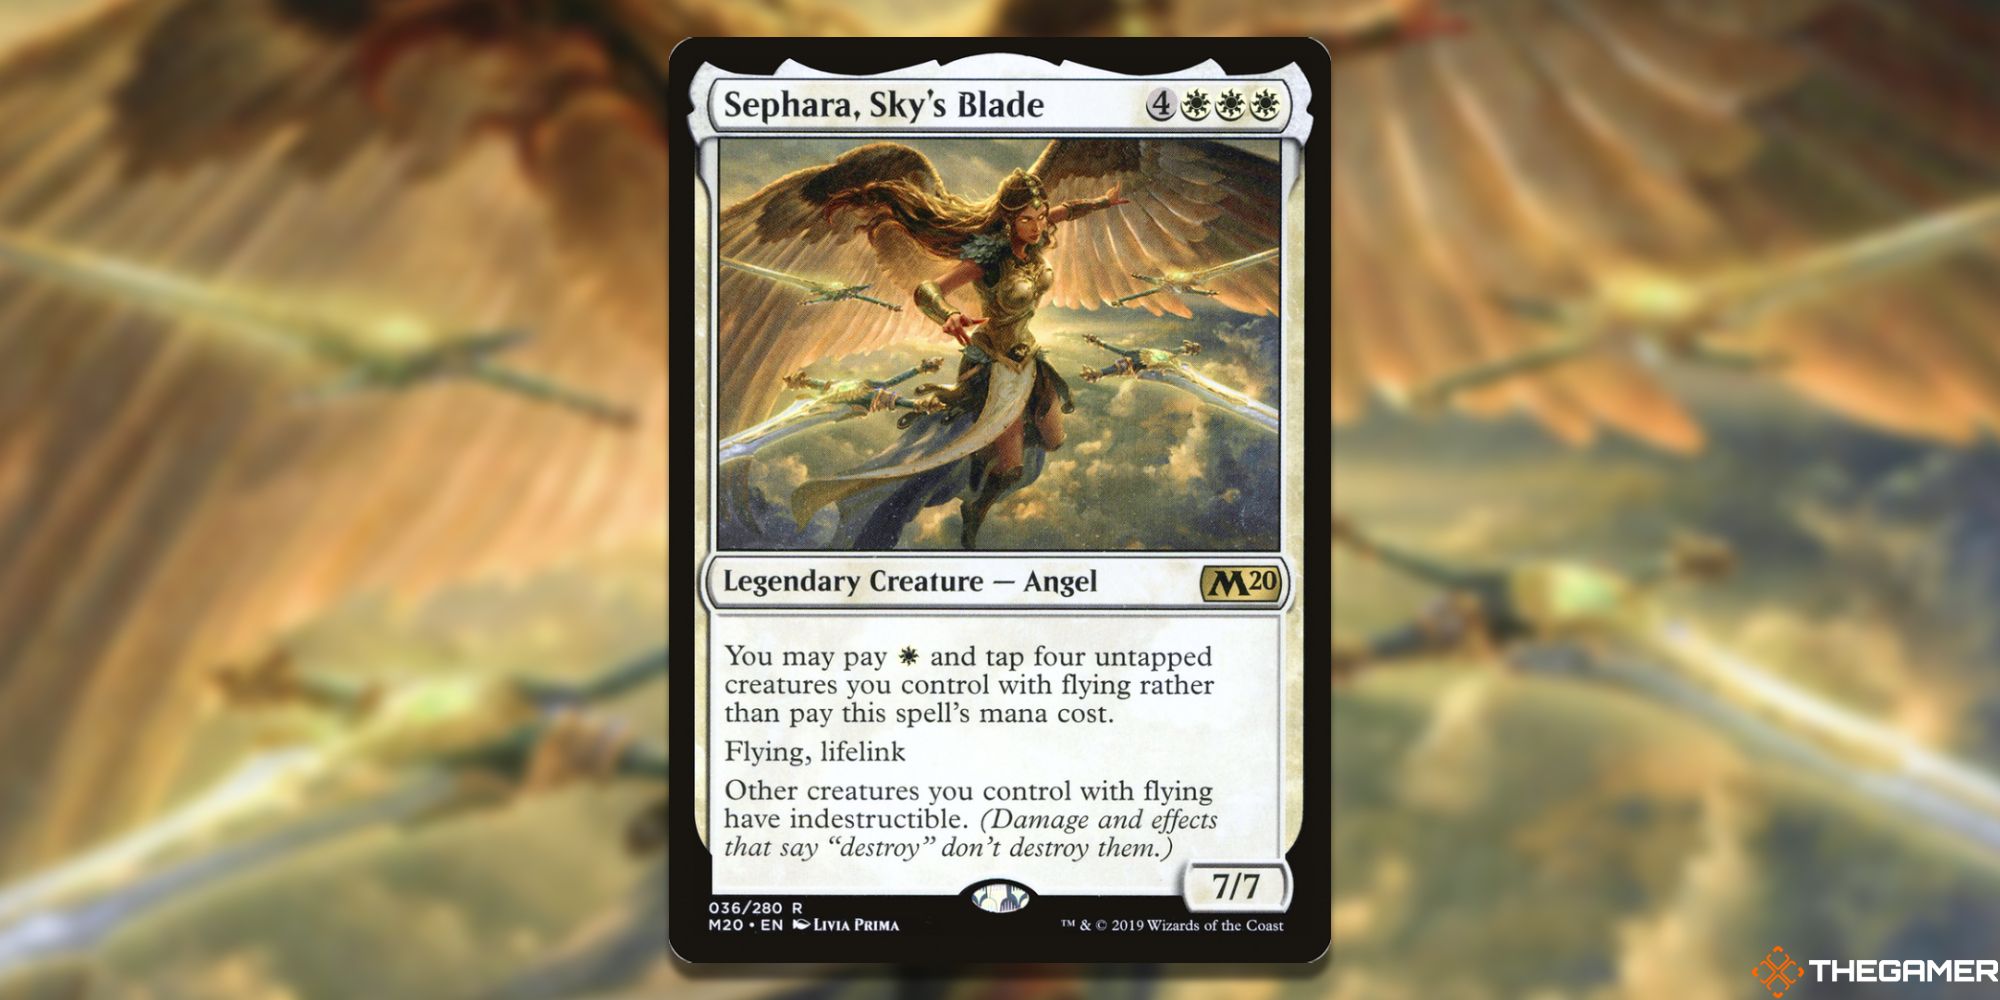 Image of Sephara, a Sky's Blade card in Magic: The Gathering, with artwork by Livia Prima